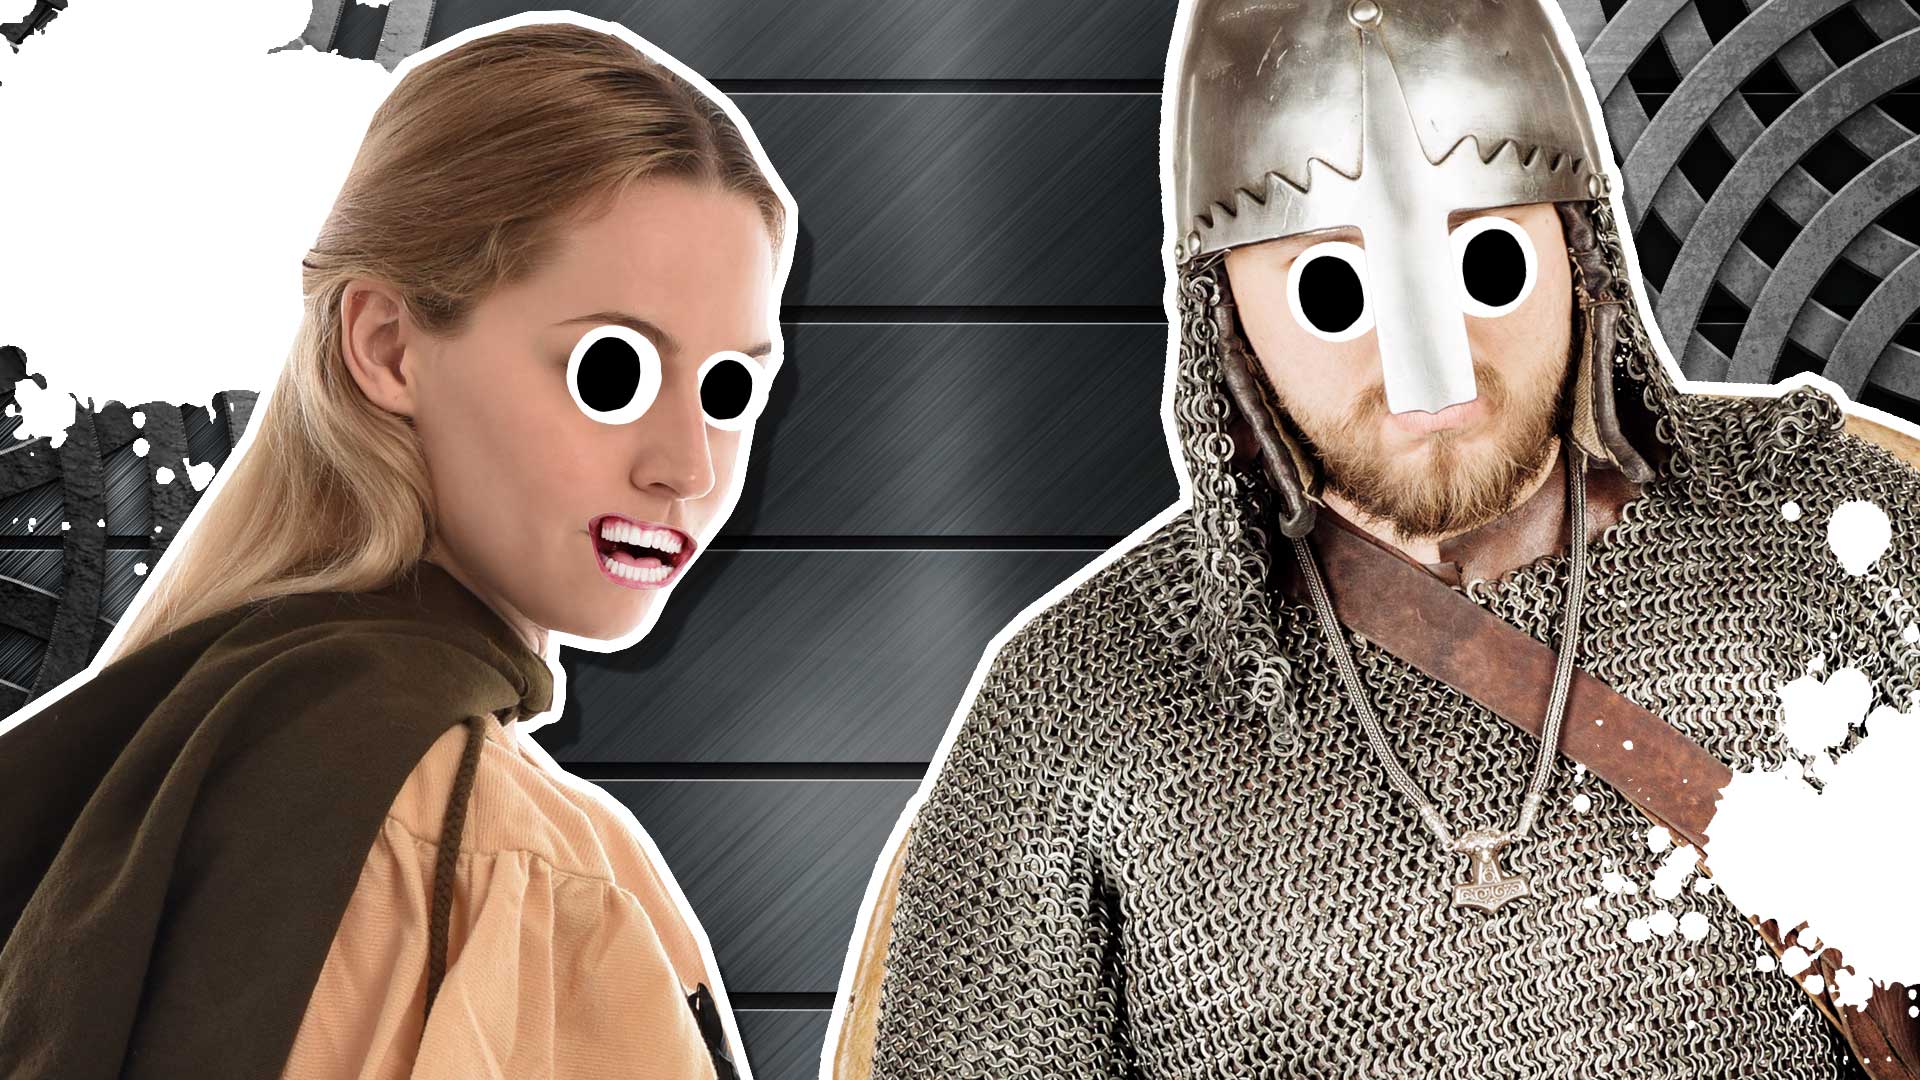 15 awesome facts about Vikings